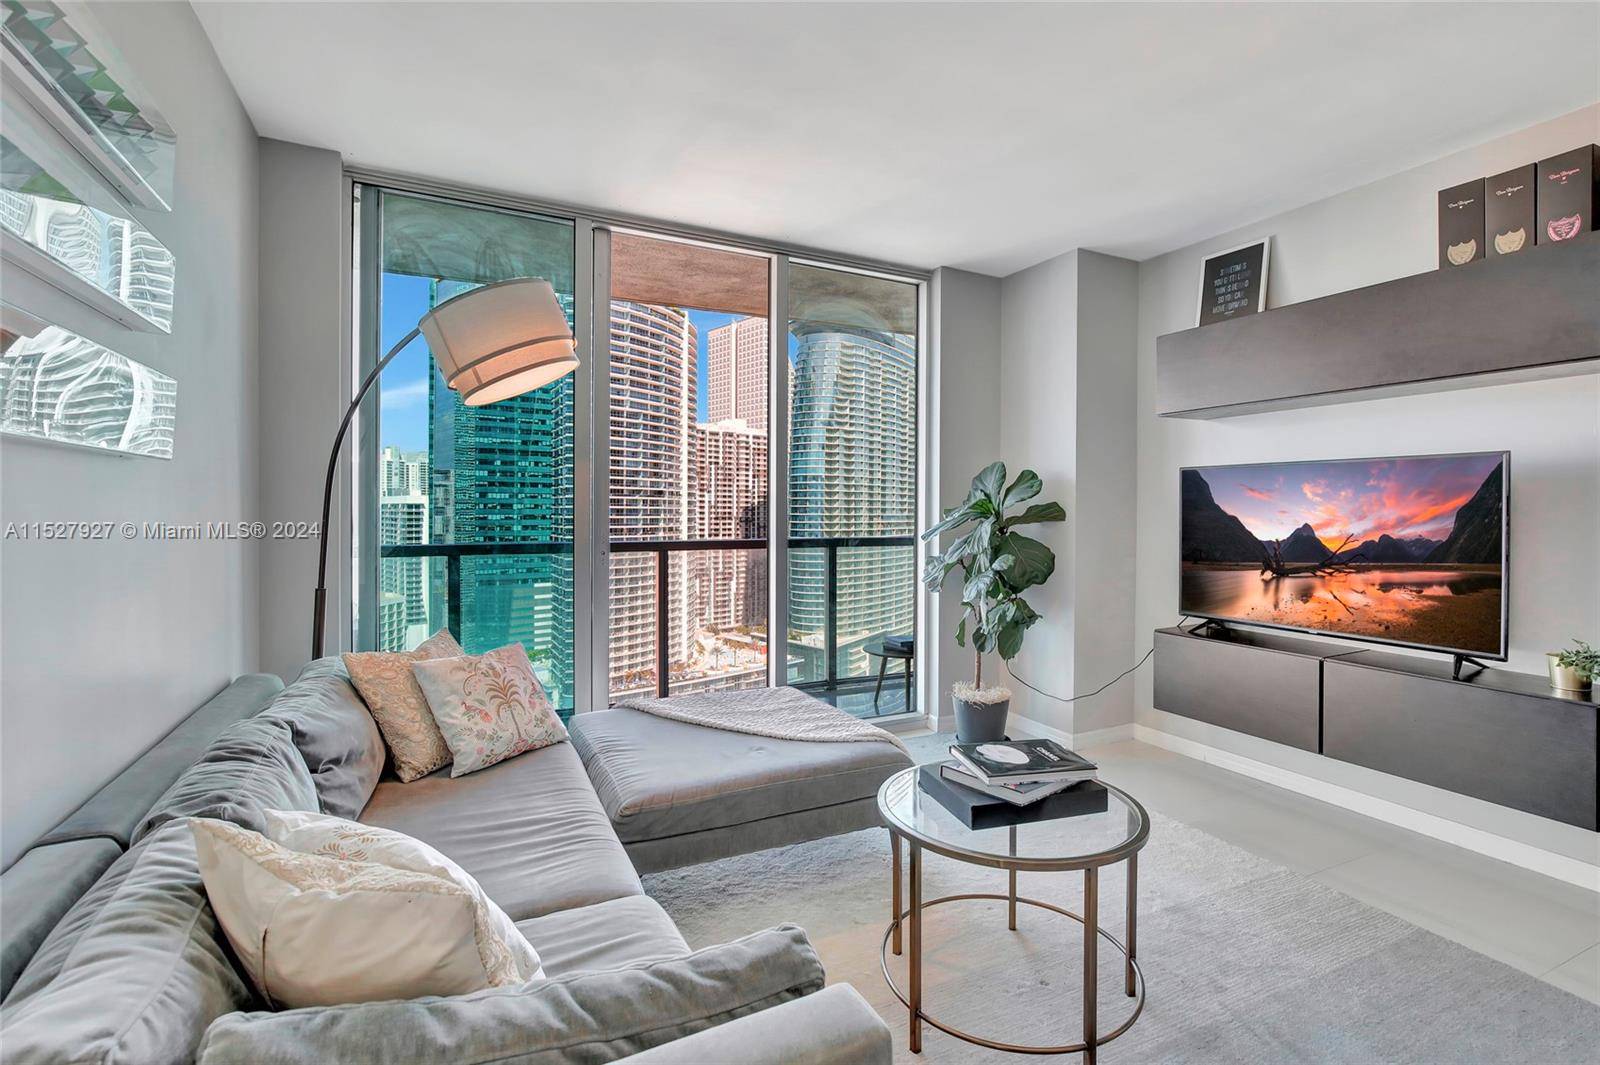 Experience luxury living at its finest in this beautiful corner unit 2 bed, 2 bath, 1124sqf condo located at 500 Brickell Avenue, Unit 3505.